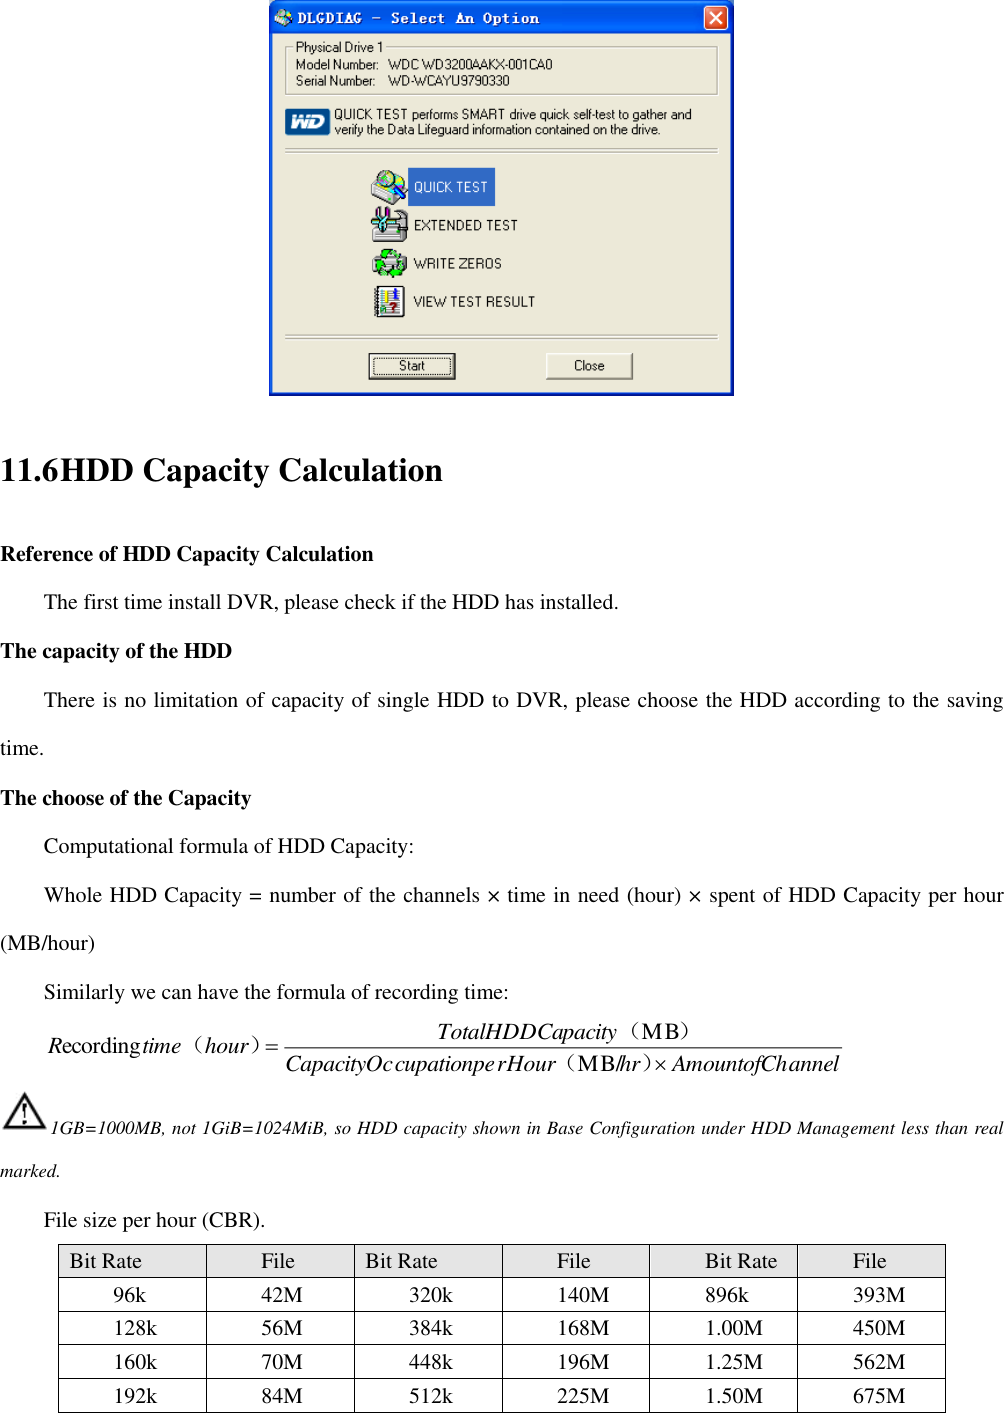  11.6 HDD Capacity Calculation Reference of HDD Capacity Calculation The first time install DVR, please check if the HDD has installed. The capacity of the HDD There is no limitation of capacity of single HDD to DVR, please choose the HDD according to the saving time. The choose of the Capacity Computational formula of HDD Capacity: Whole HDD Capacity = number of the channels × time in need (hour) × spent of HDD Capacity per hour (MB/hour) Similarly we can have the formula of recording time: annelAmountofChhrrHourcupationpeCapacityOcpacityTotalHDDCahourtimeR ）（）（）（ MB/MBecording 1GB=1000MB, not 1GiB=1024MiB, so HDD capacity shown in Base Configuration under HDD Management less than real marked. File size per hour (CBR). Bit Rate File Bit Rate File Bit Rate File 96k 42M 320k 140M 896k 393M 128k 56M 384k 168M 1.00M 450M 160k 70M 448k 196M 1.25M 562M 192k 84M 512k 225M 1.50M 675M 